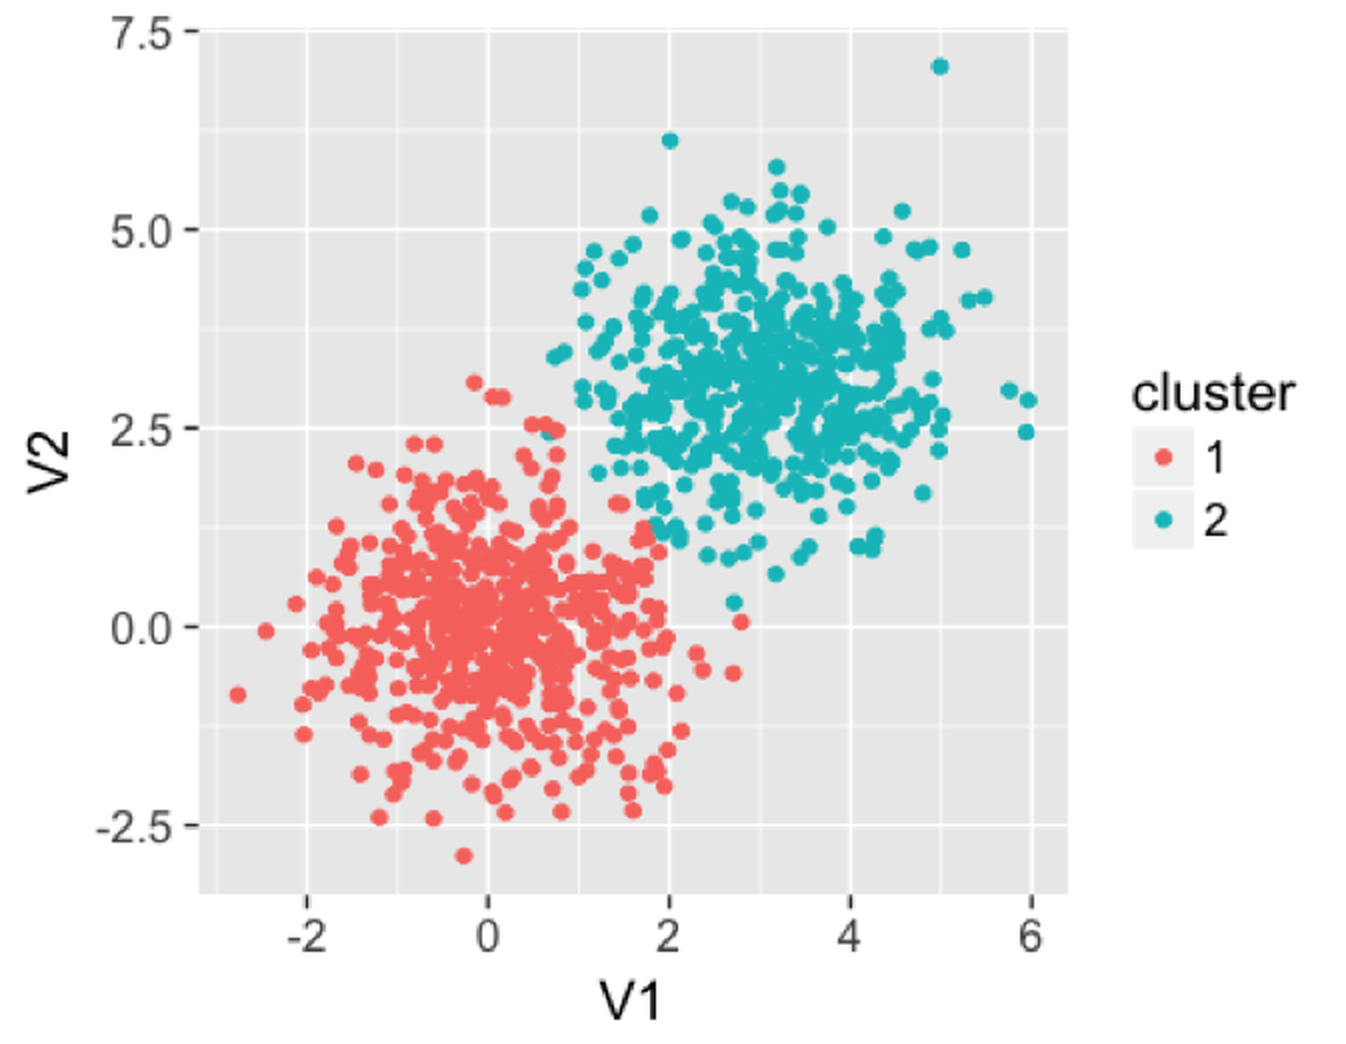 Clusters produced by the random forest model